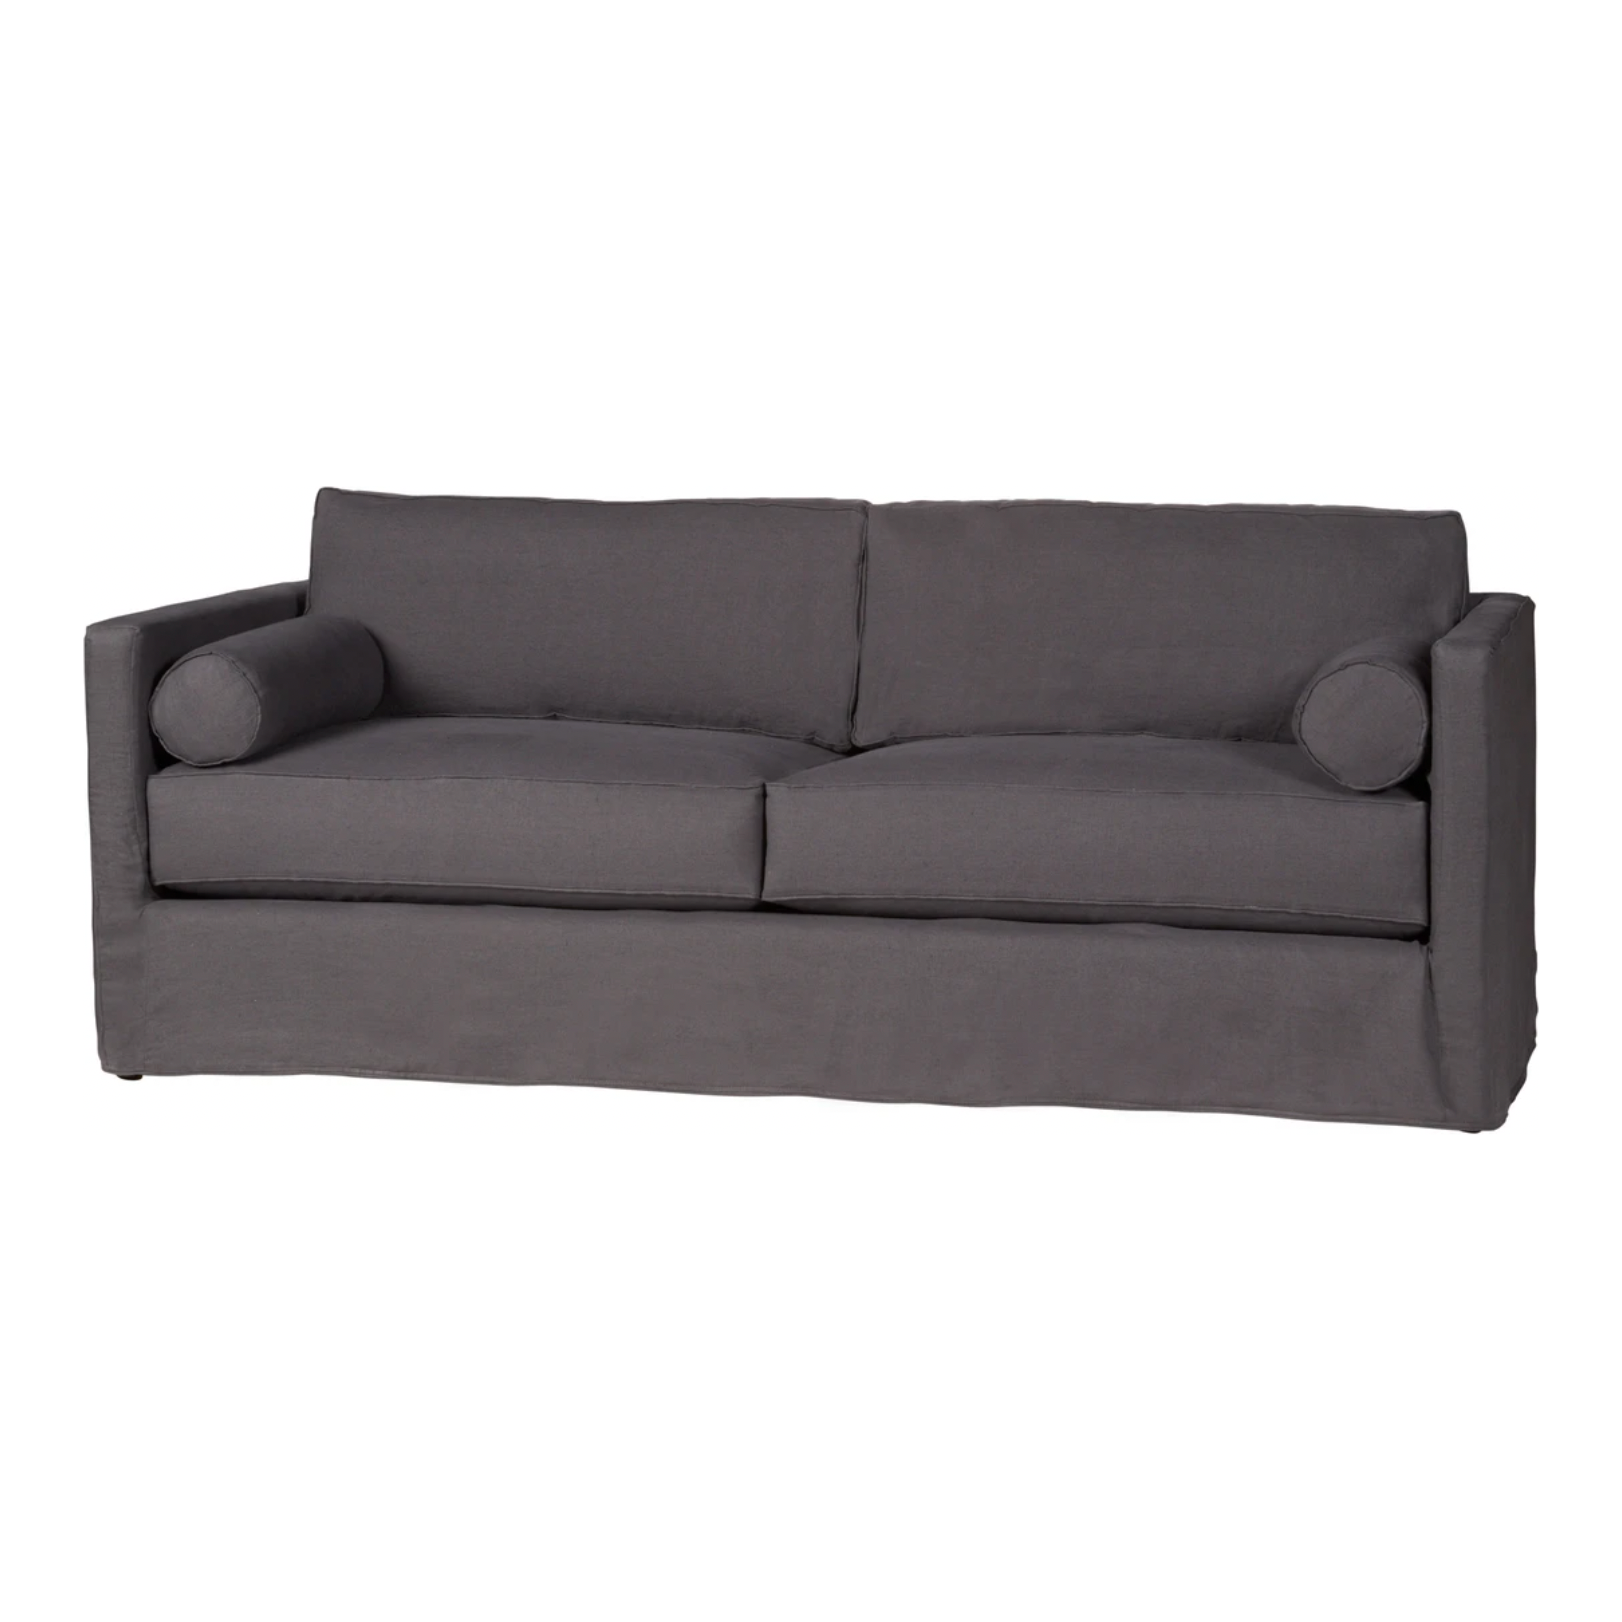 Refresh your space with a touch of transitional style. The Vista Slipcovered Sofa by Cisco Brothers showcases an angular, modern silhouette with flat welt detailing. This sofa has a soft fill two-over-two seat and feather cloud back cushion fill. The structured design is softened by lumbar pillows.      Overall: 84"w x 36"d x 28"h